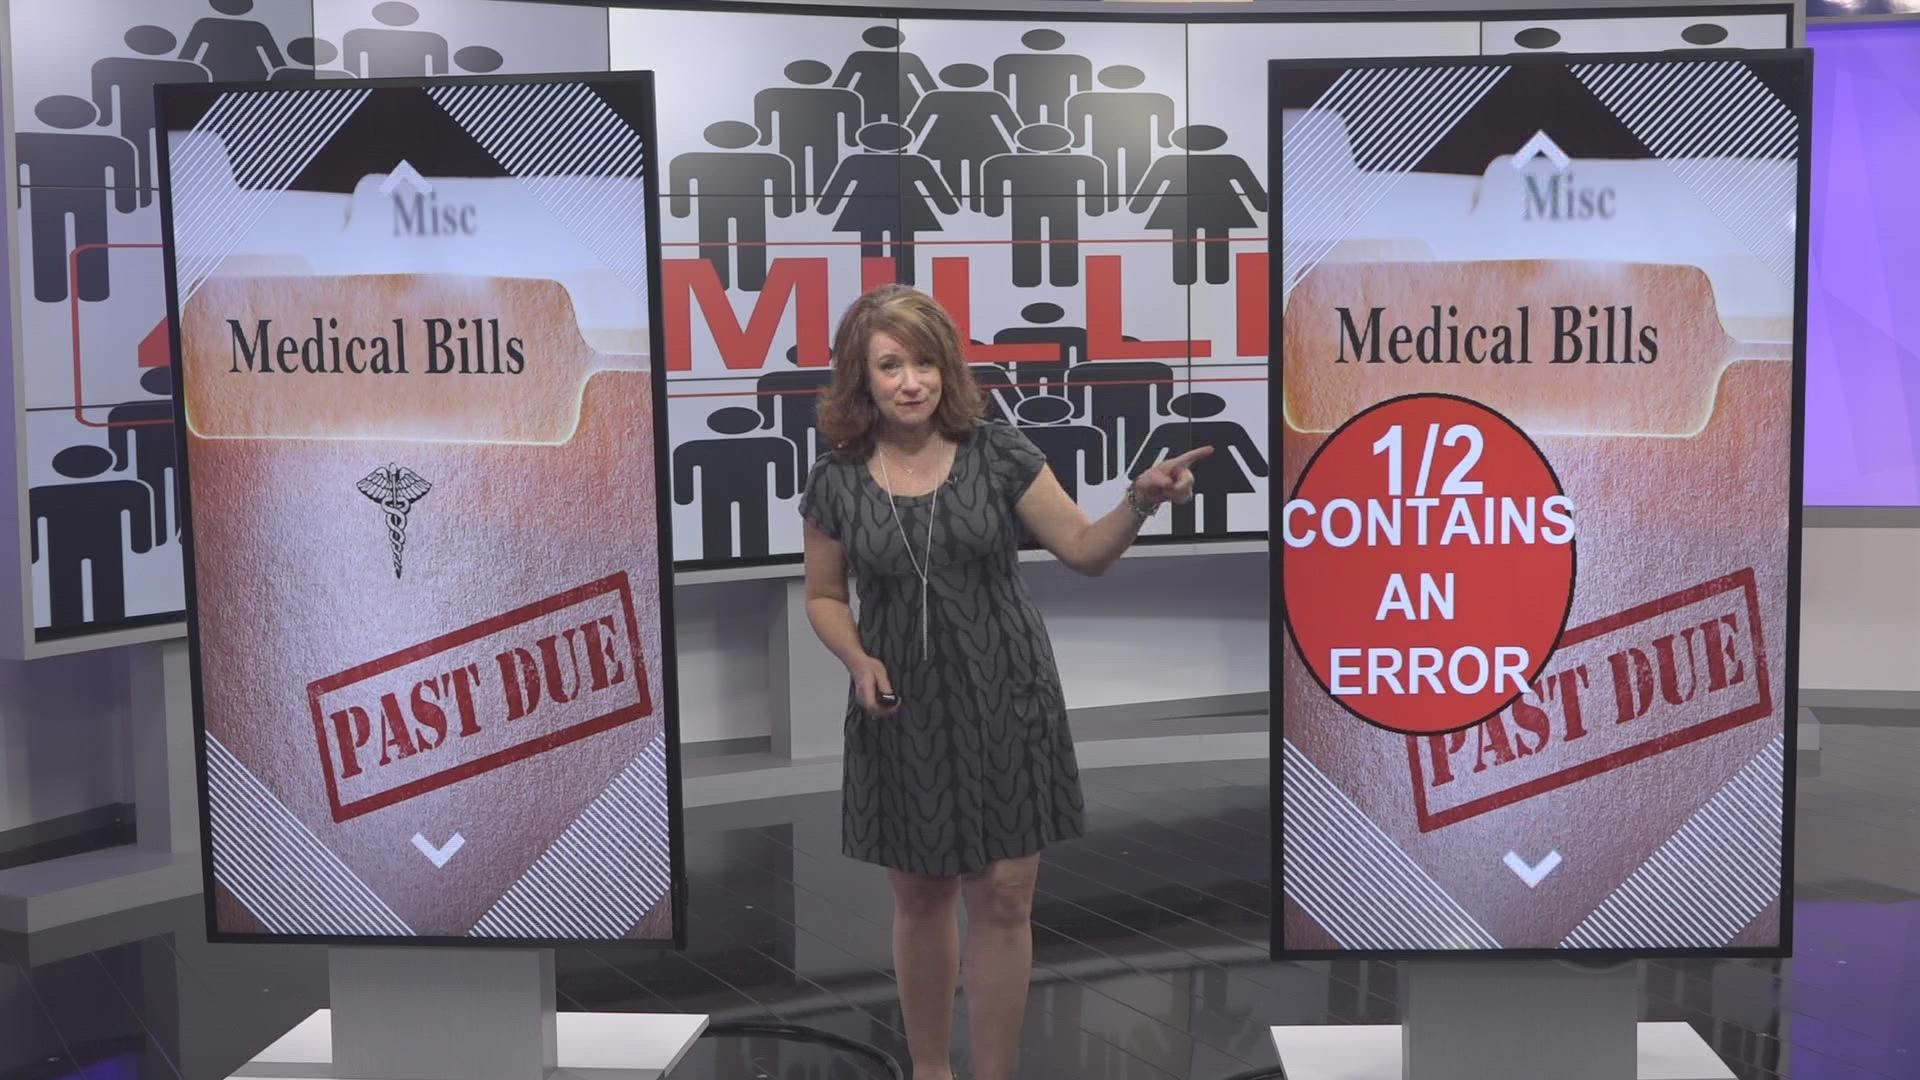 Millions of Americans have medical debt. Nearly half of their bills have errors in them.